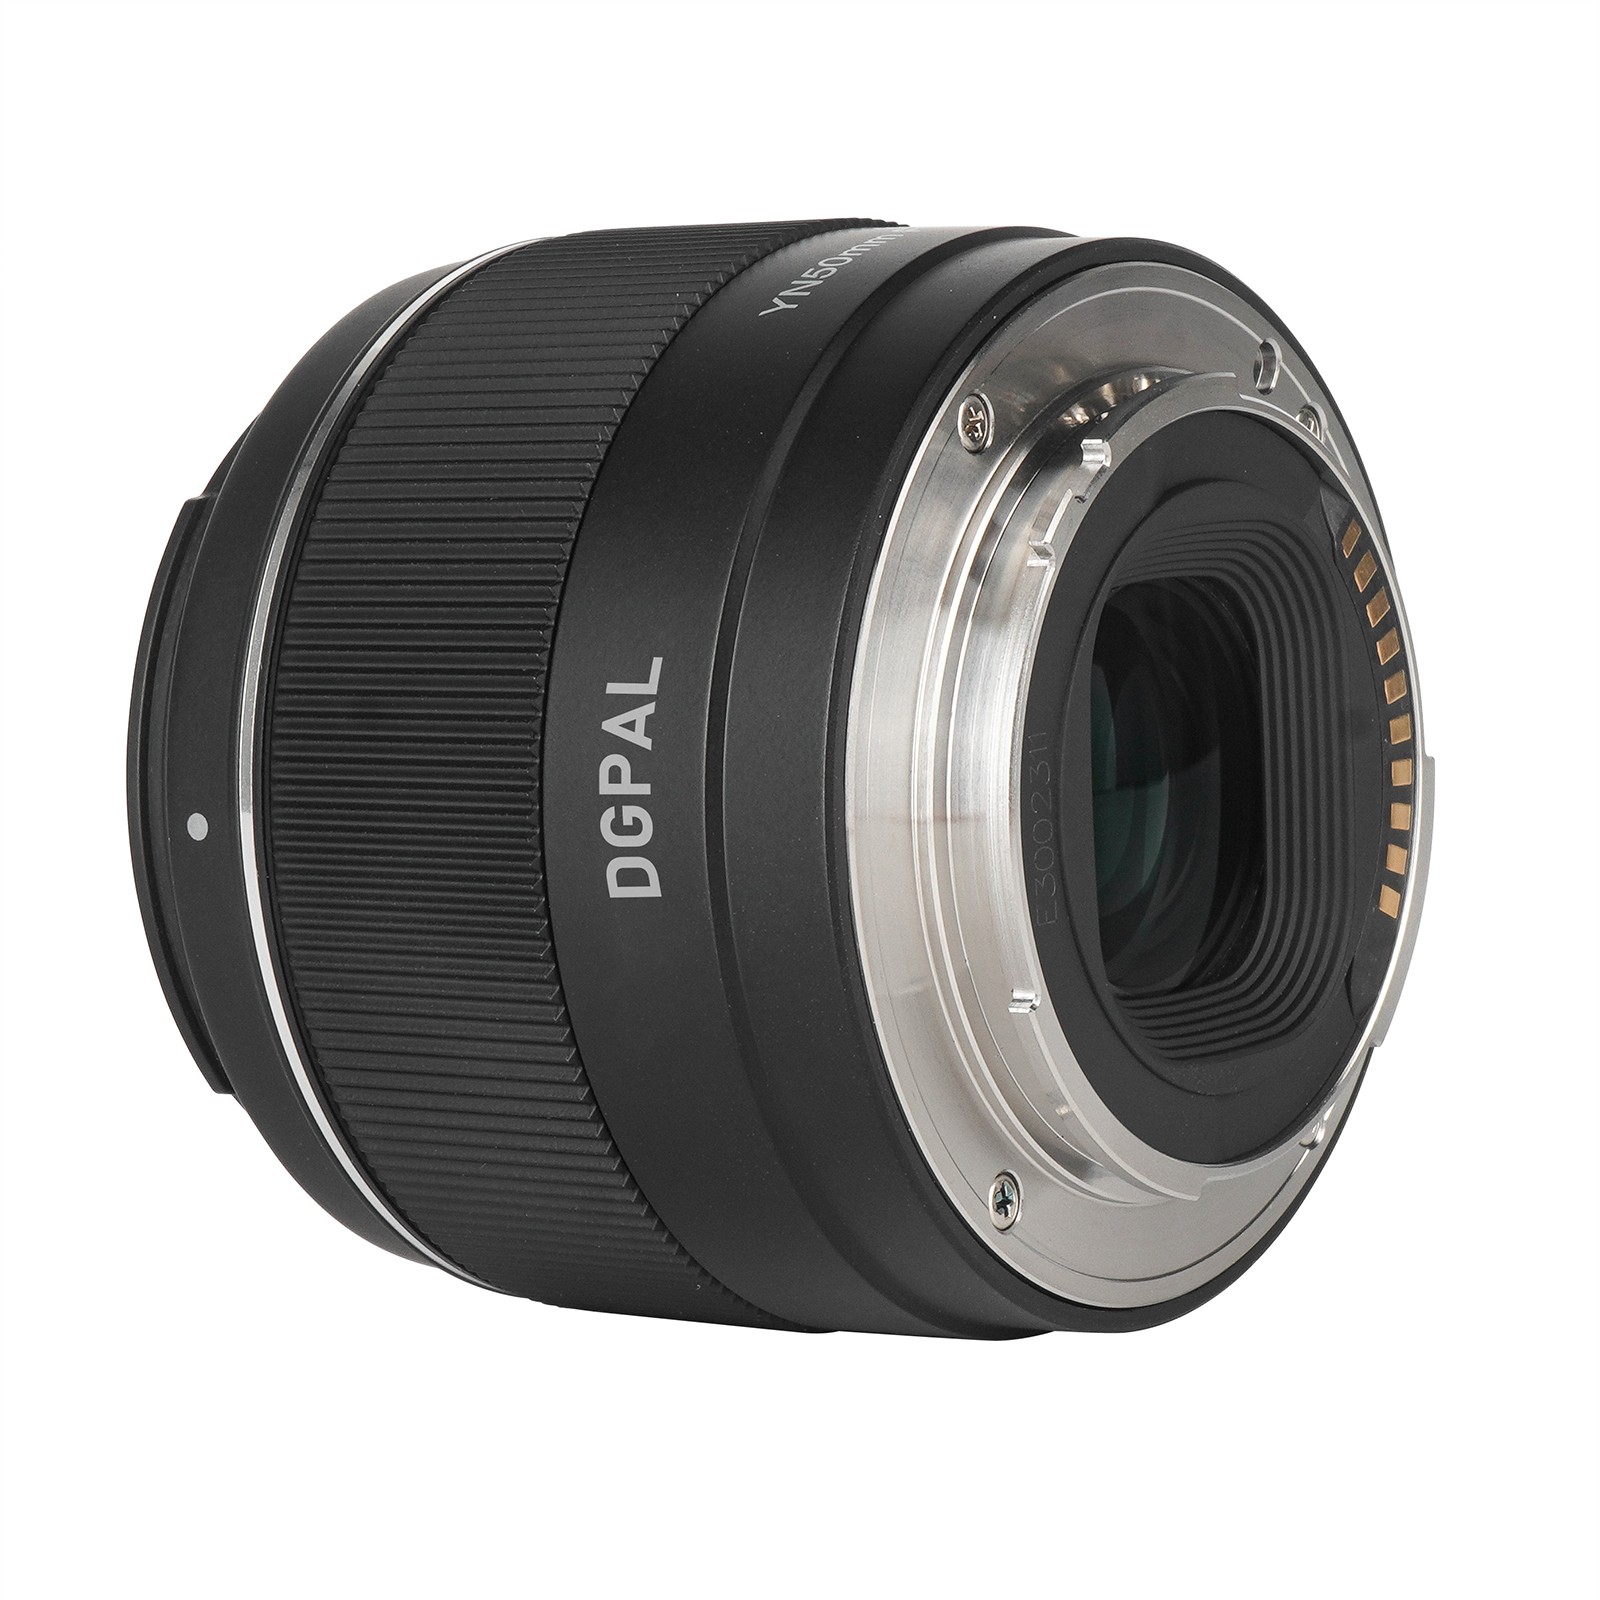 DGPAL 50mm F1.8 Prime Lens for Sony Camera